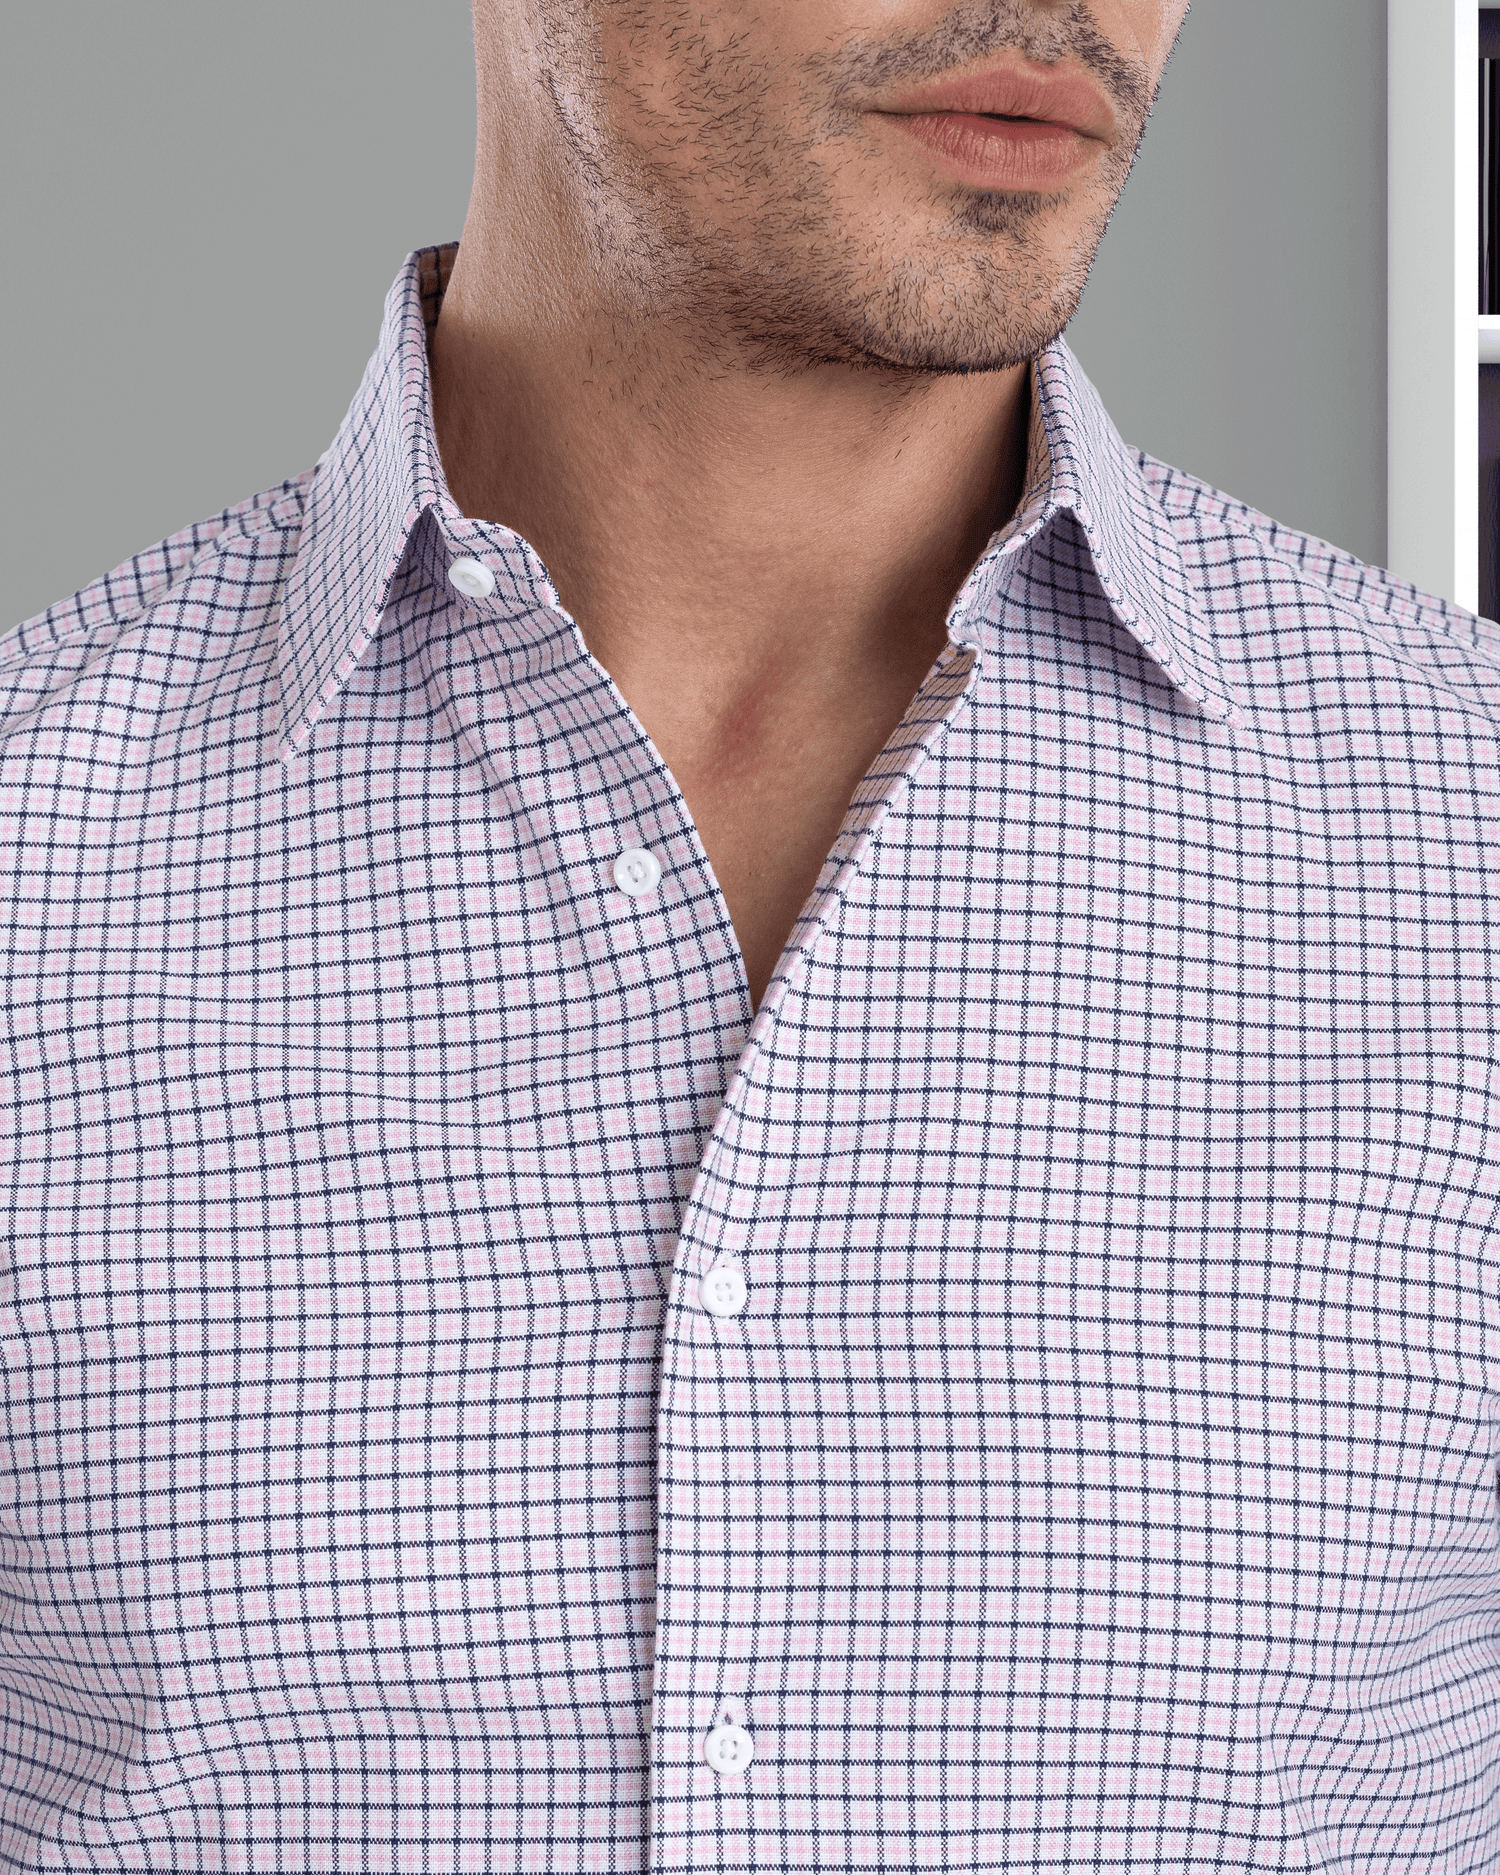 Model close up wearing custom check shirts for men by Luxire navy pink tattersall